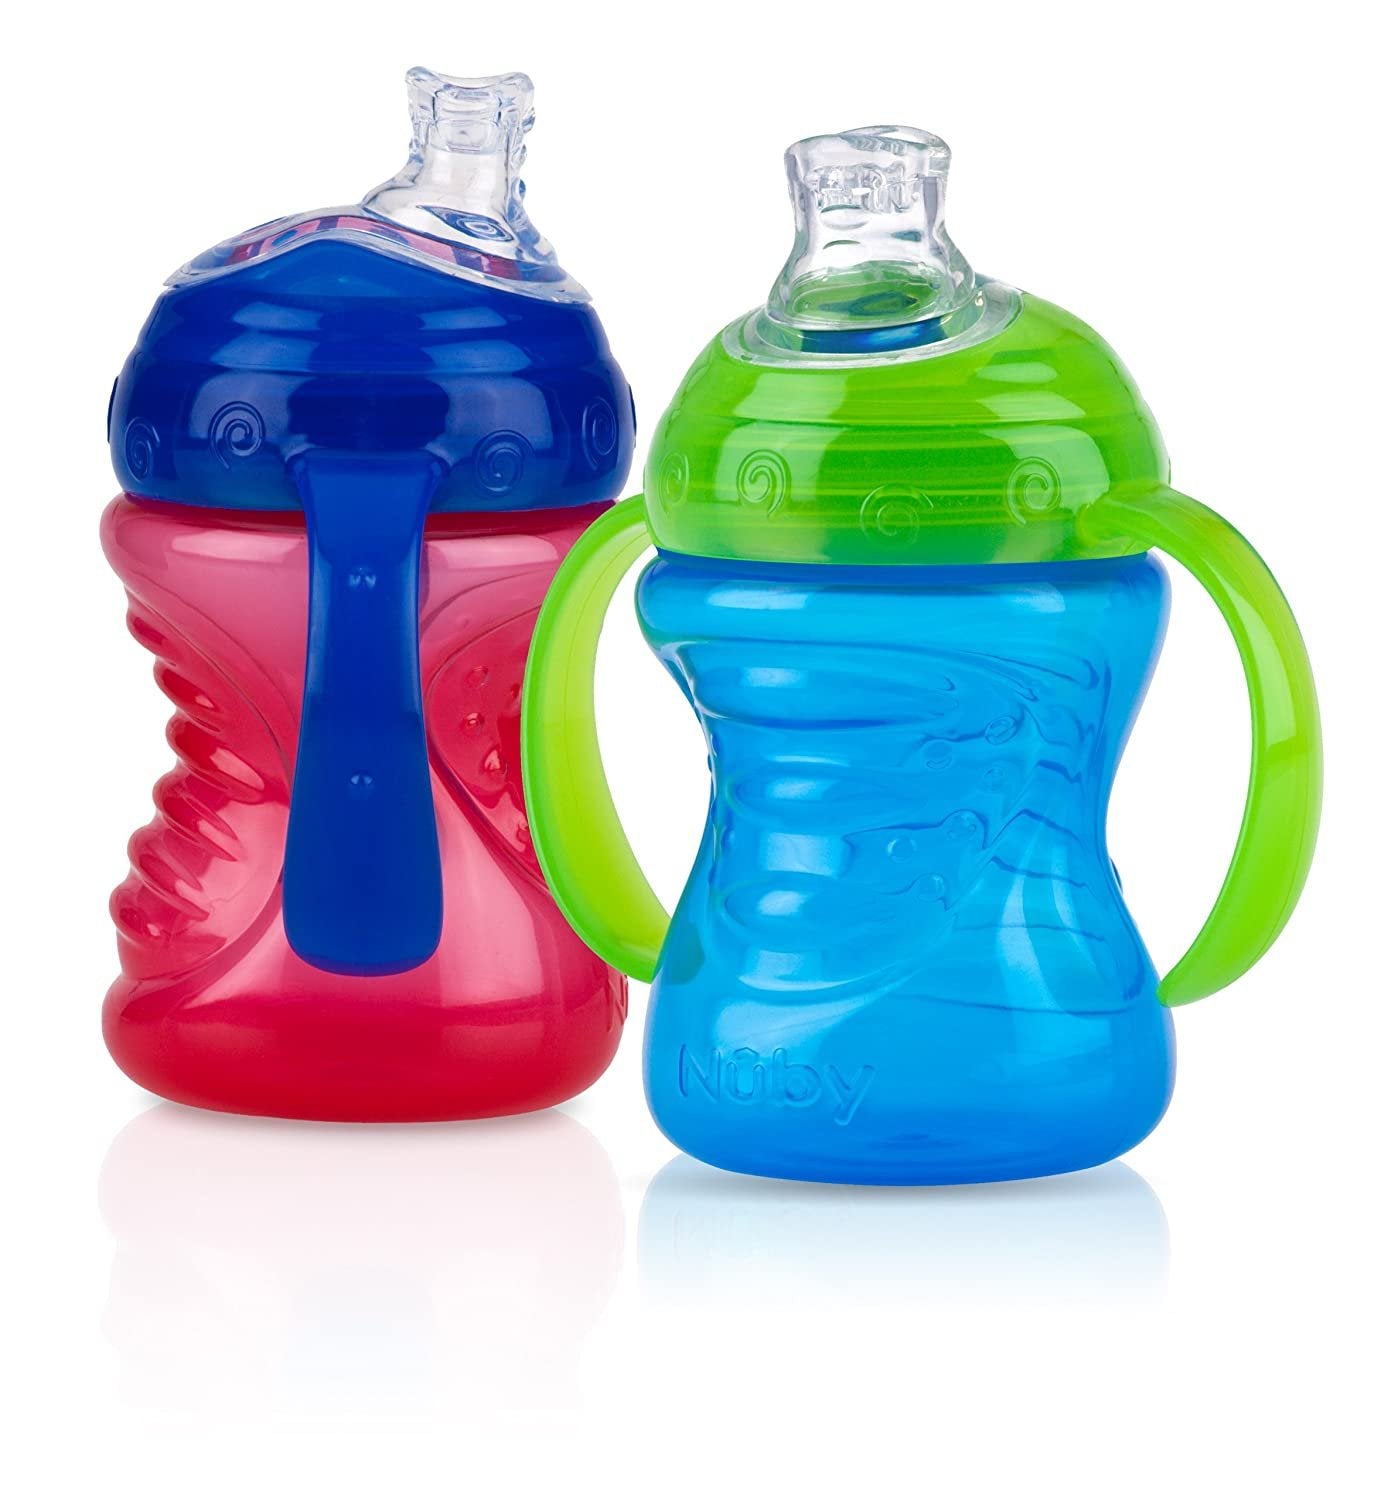 Nuby Two-Handle No-Spill Super Spout Grip N' Sip Cups, 8 Ounce (2 Count, Multi)